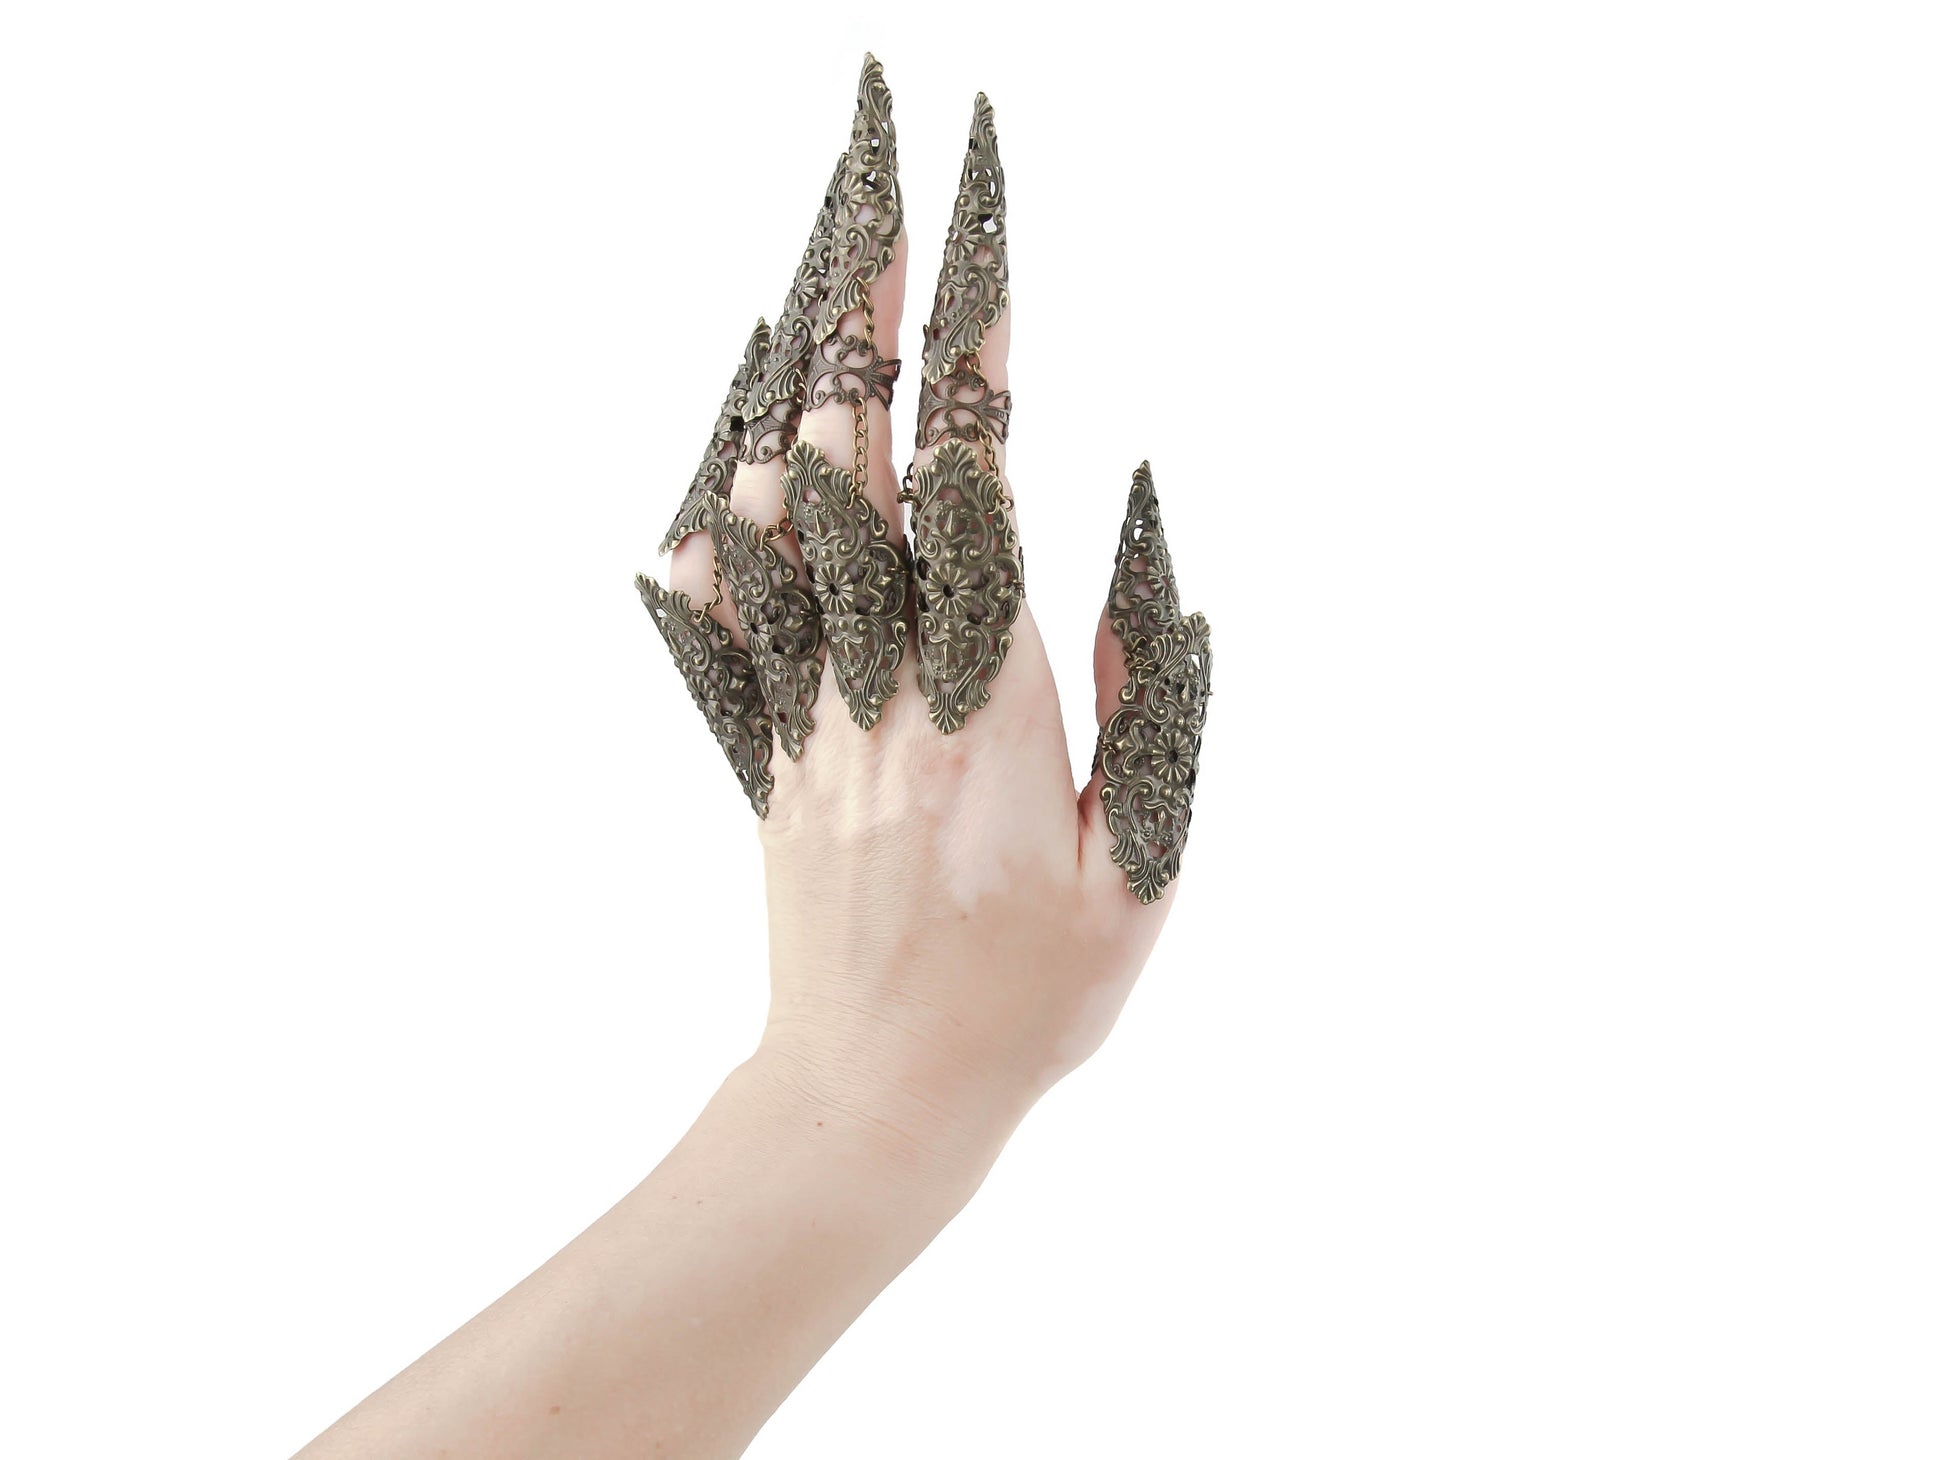 A hand strikingly showcases Myril Jewels' bronze metal lace finger armor rings, a bold statement accessory aligning with the Neo Gothic and Witchcore aesthetics. Ideal for Halloween, Gothic-chic events, or everyday wear for Punk and Gothic Lolita enthusiasts, these handcrafted rings are a hallmark of whimsigoth elegance.